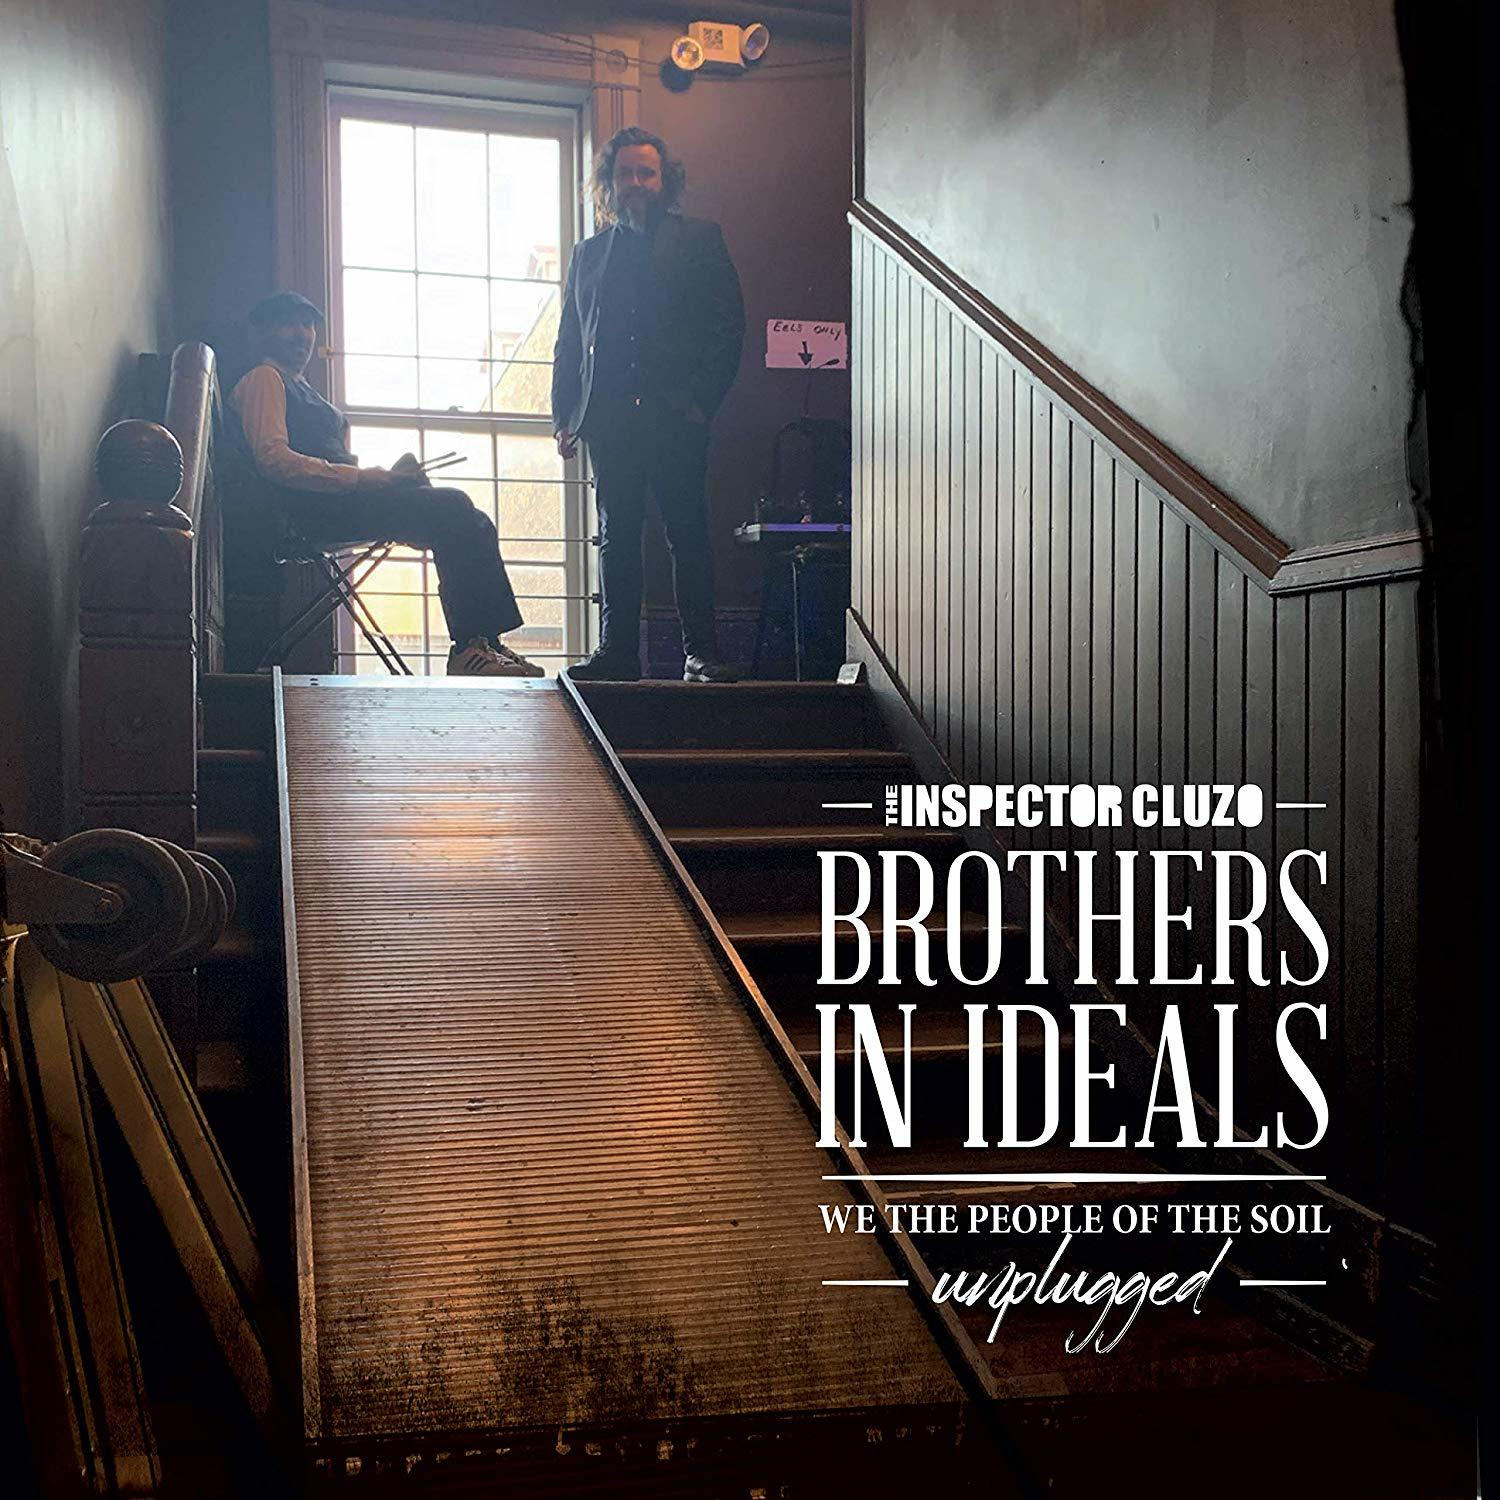 - Cluzo We The In Inspector U People (Vinyl) The - - Soil The Ideals Brothers - Of